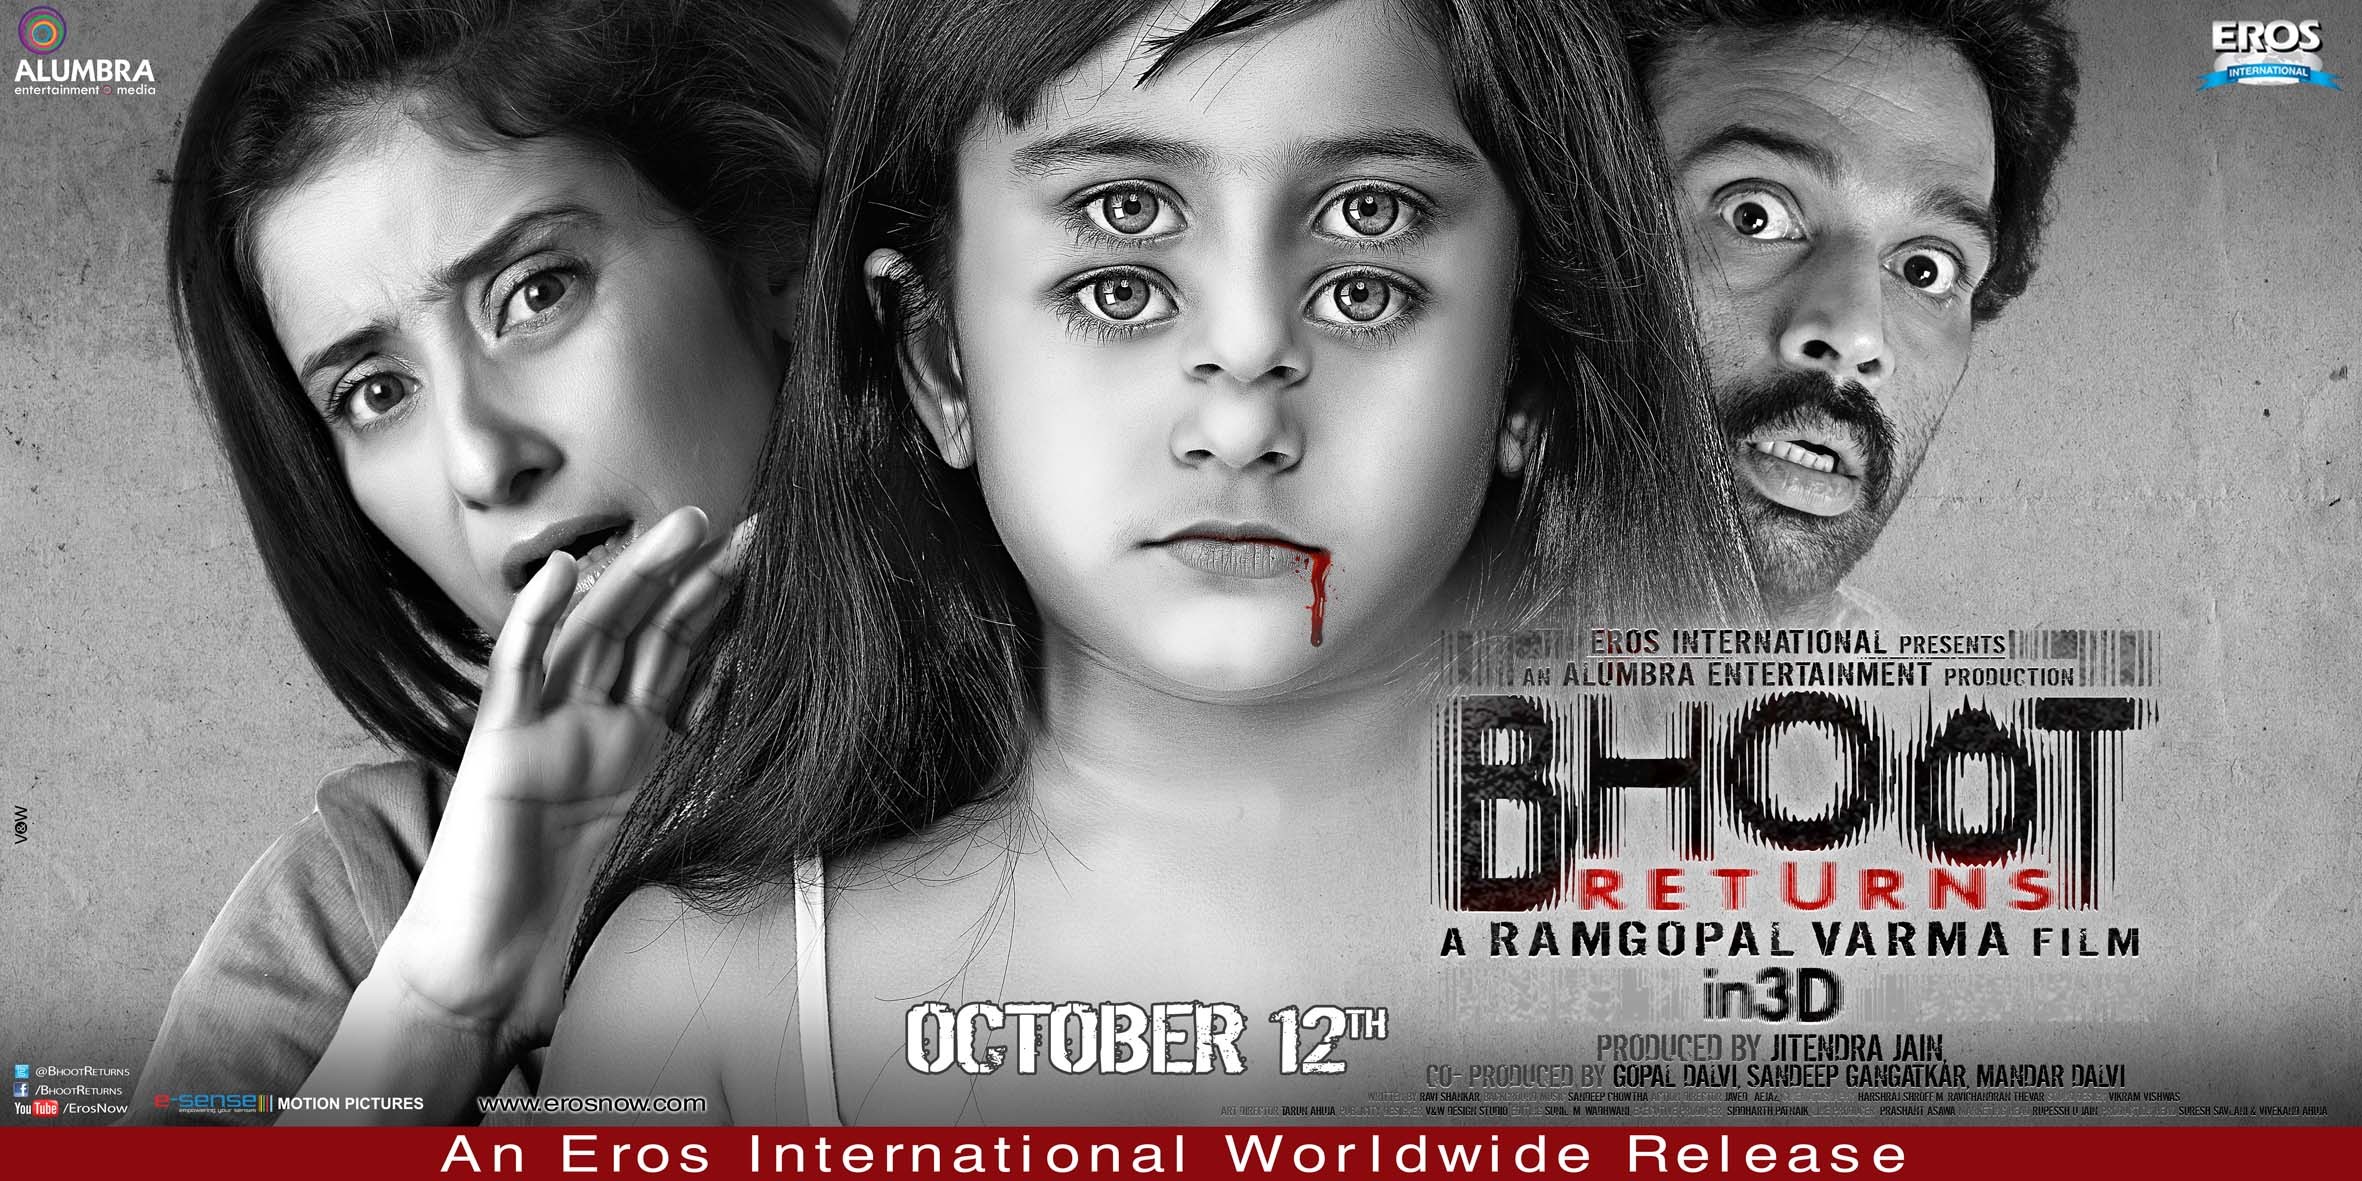 Mega Sized Movie Poster Image for Bhoot Returns (#2 of 3)